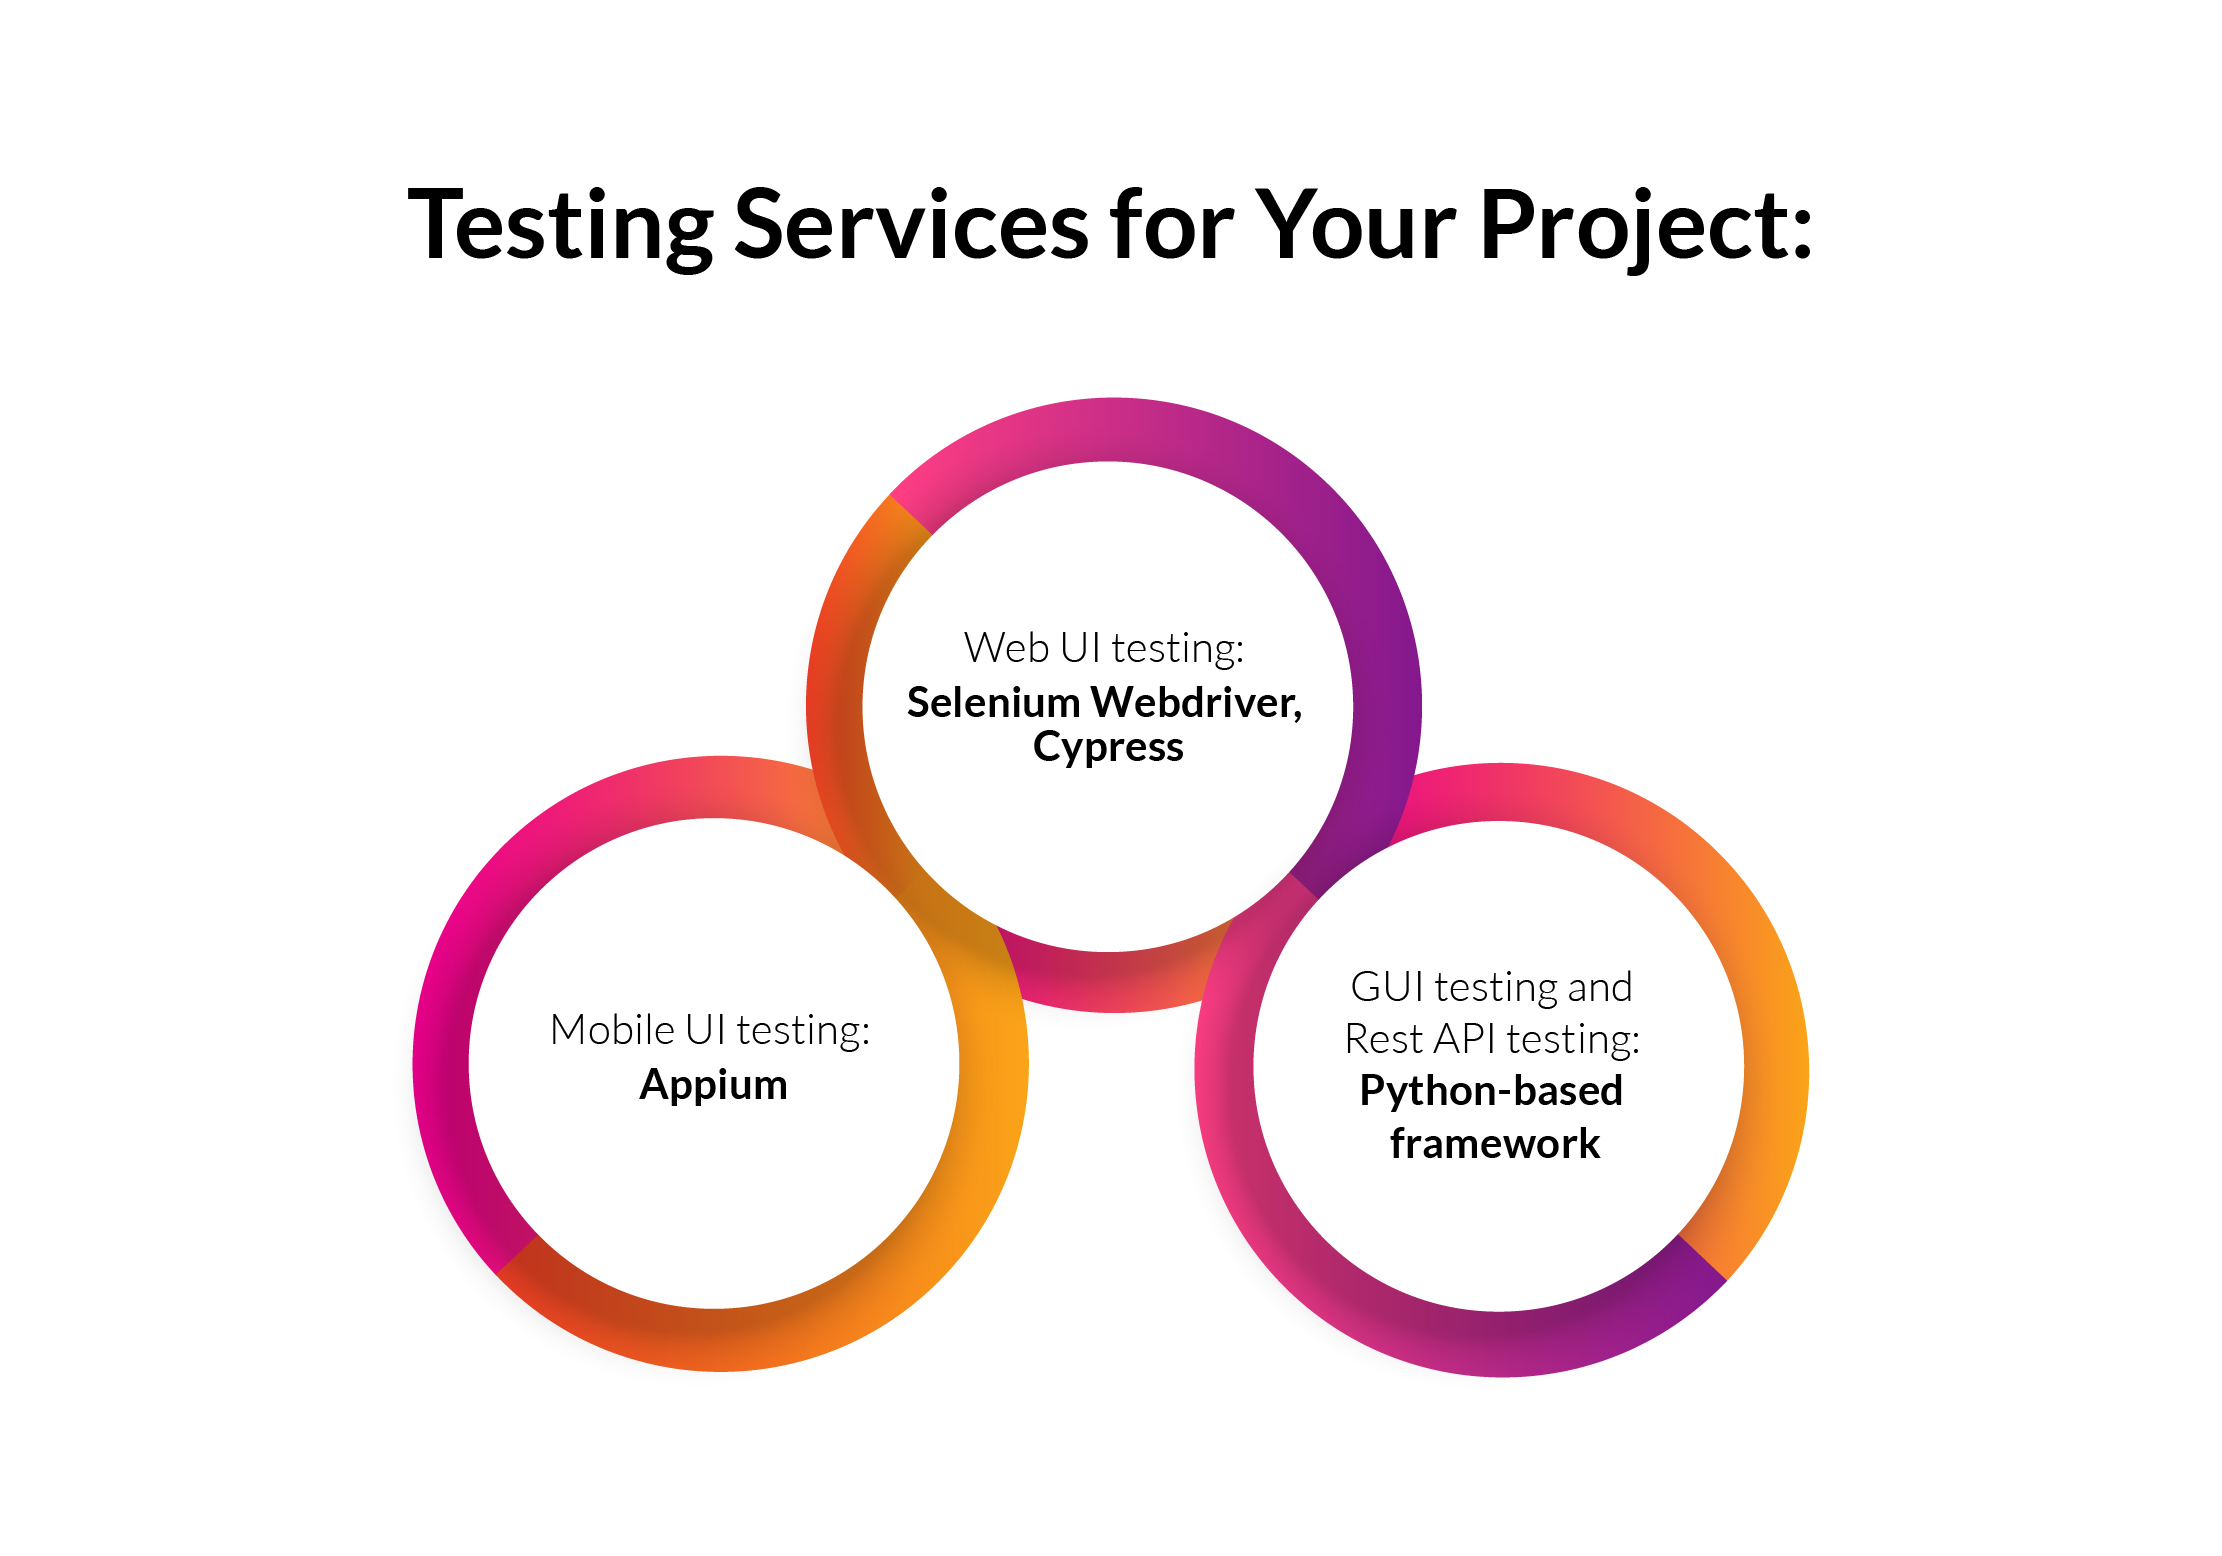 Testing Services for Your Project